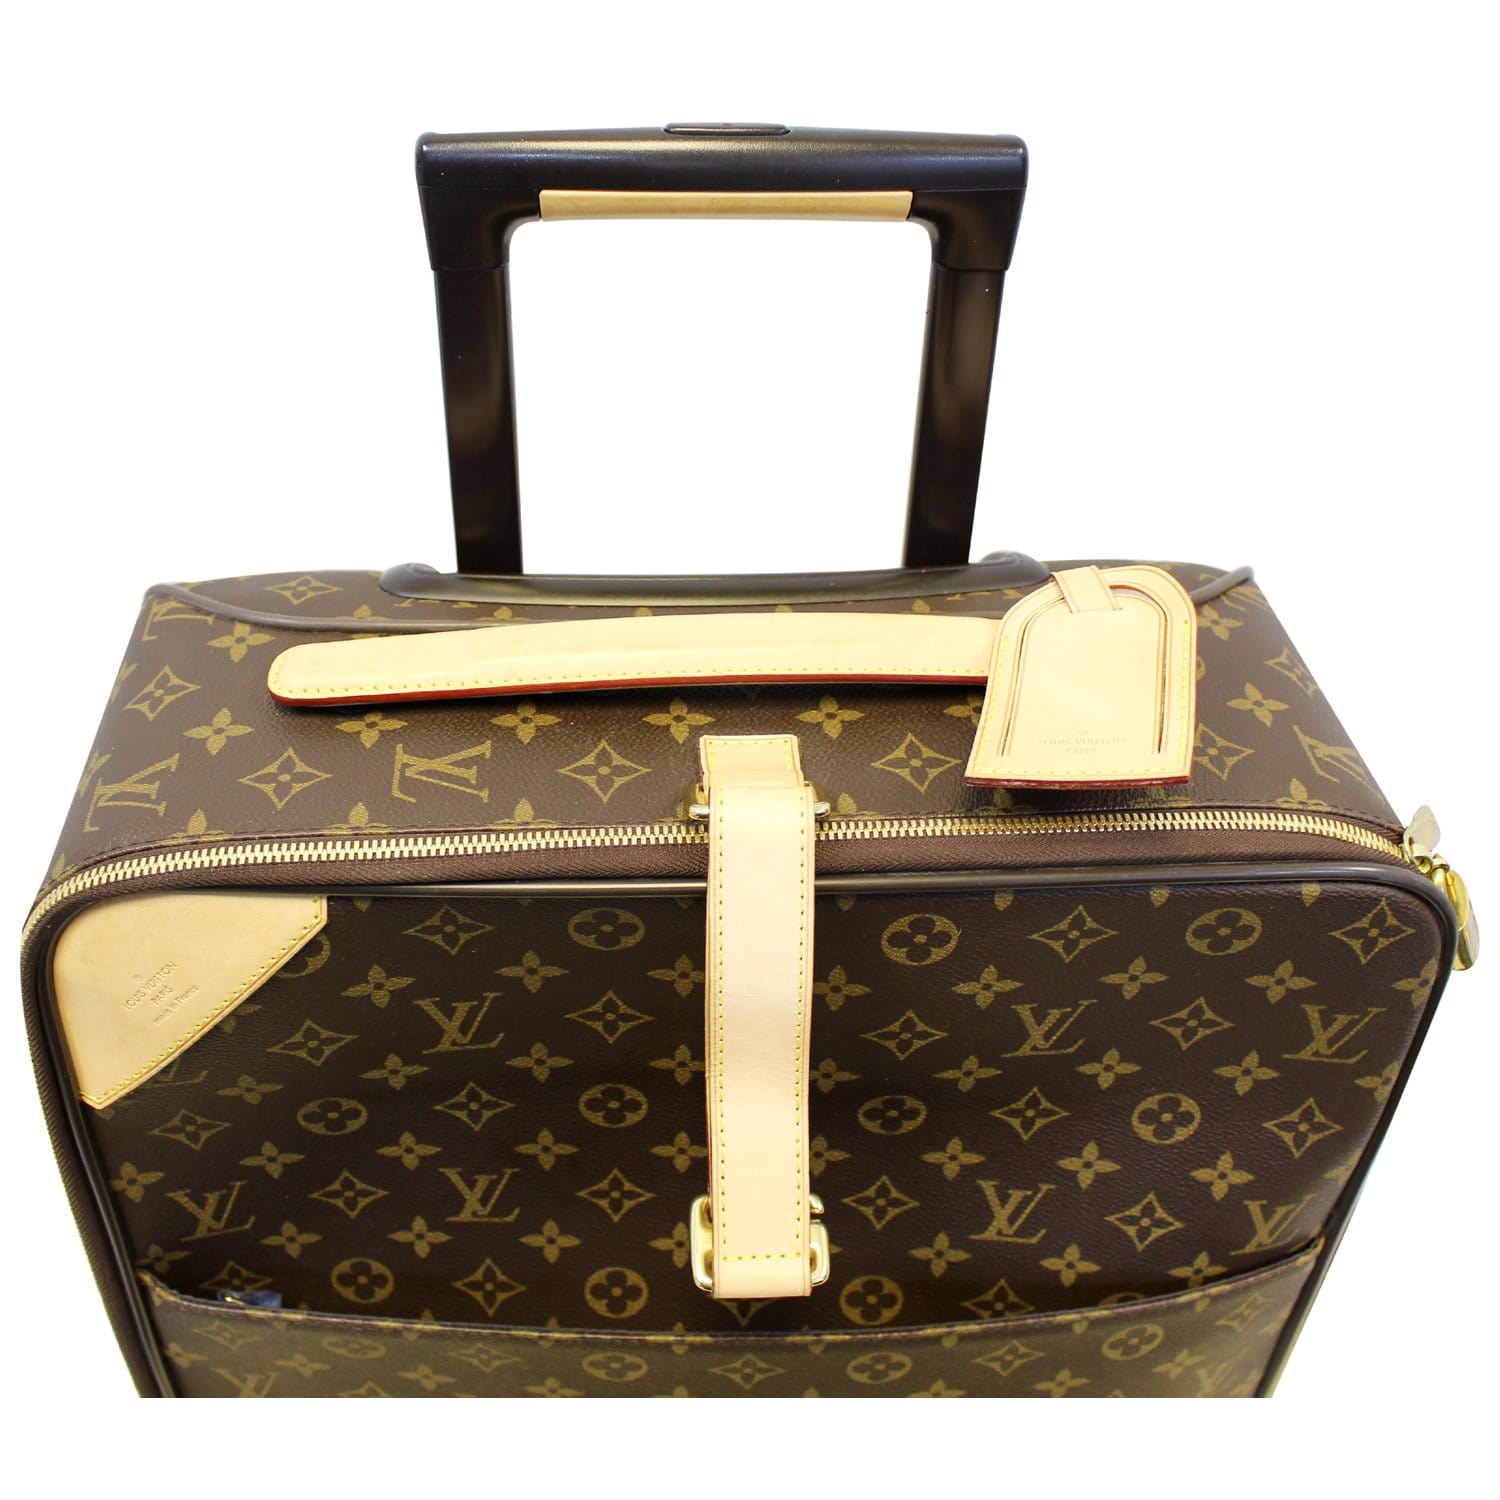 Louis Vuitton, Bags, Set Of 5 Luxury Shopping Bags Lv Hermes Guccigreat  For Props Or Display